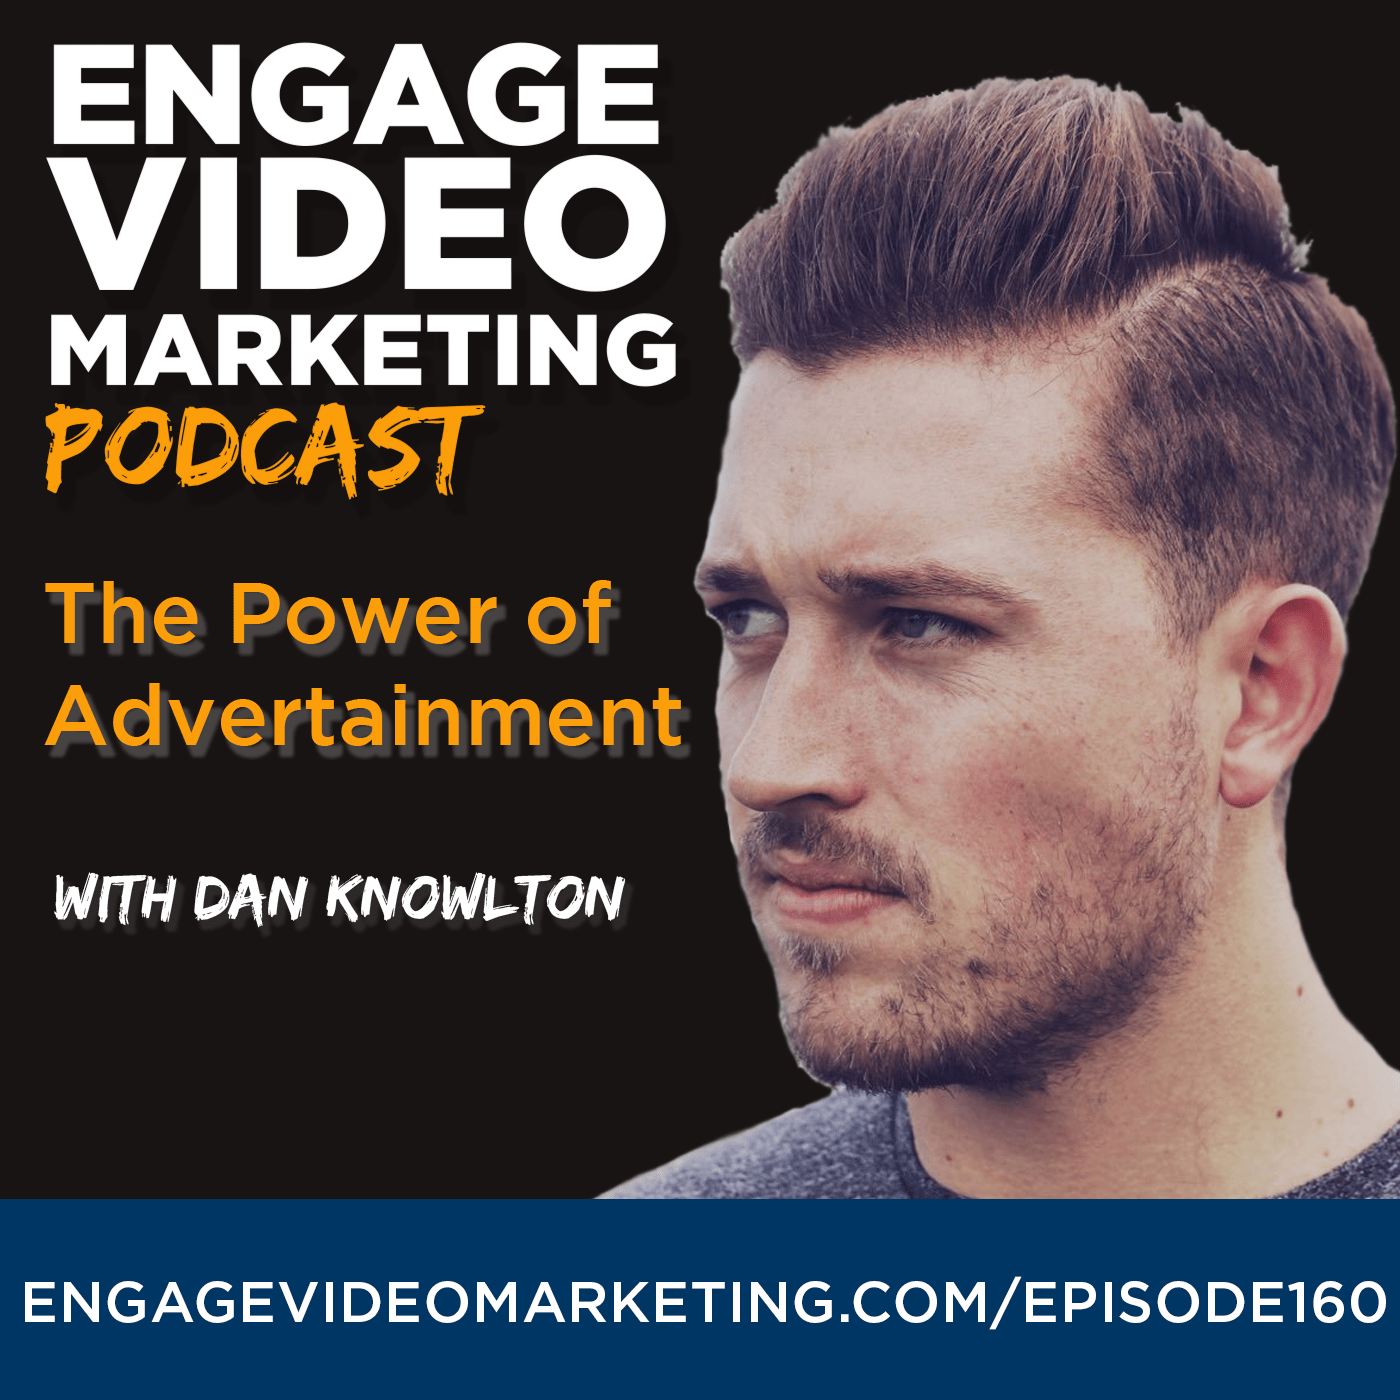 The Power of Advertainment with Dan Knowlton